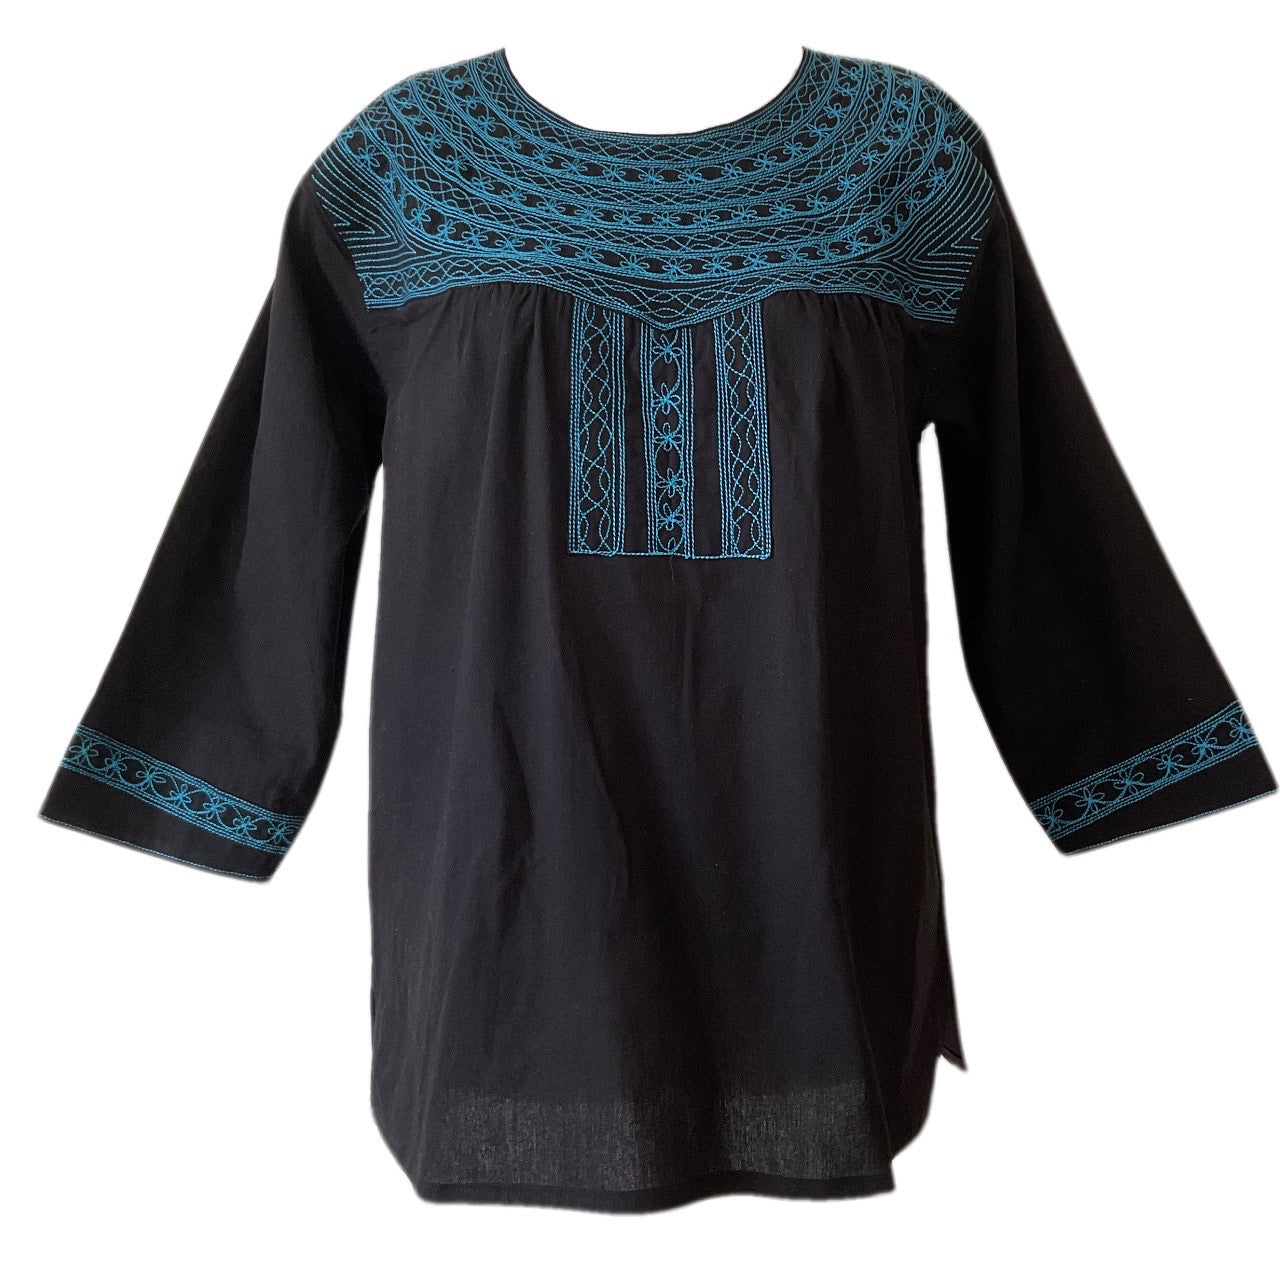 Oaxacan artisan blouse in black with blue embroidery